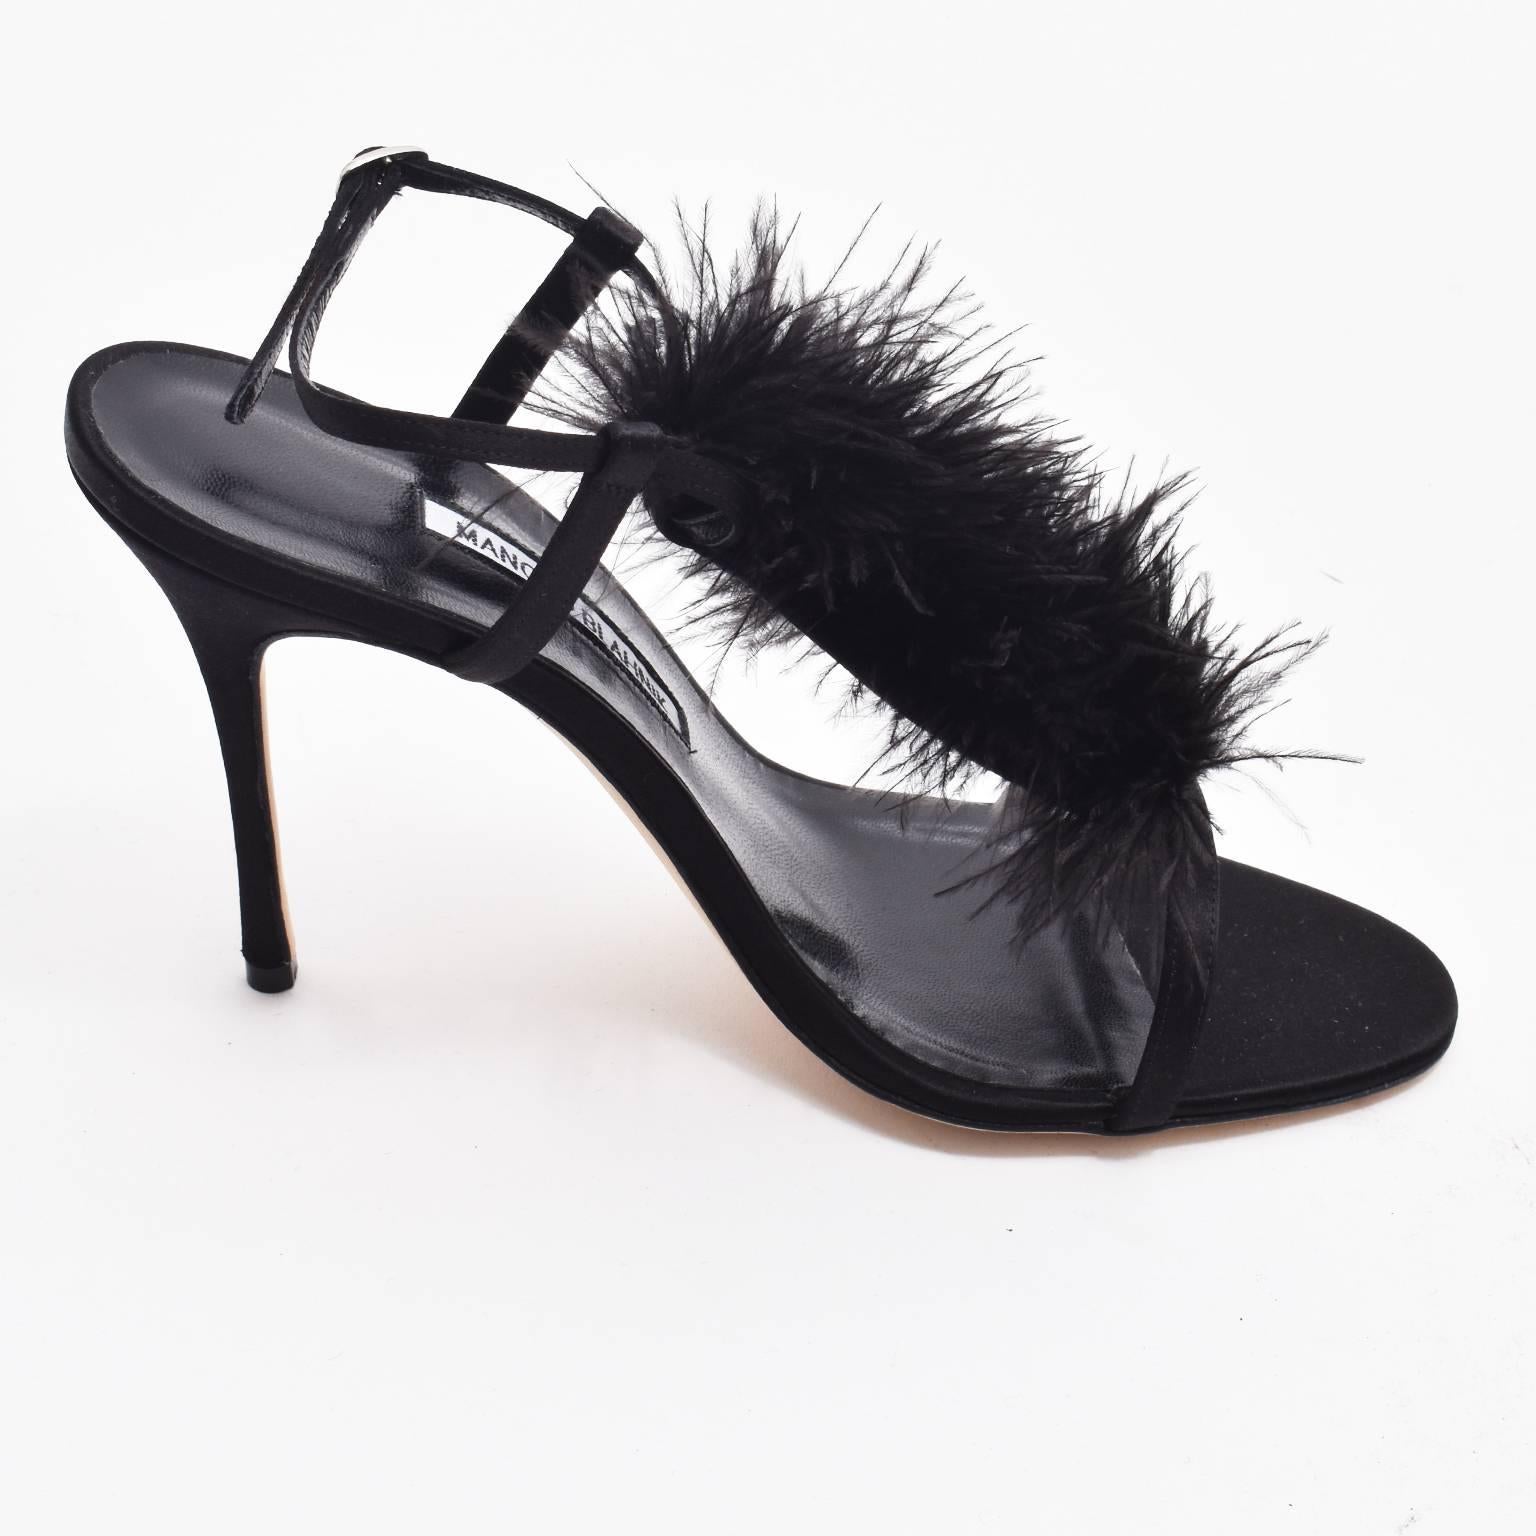 A pair of brand new and unworn black stiletto heels with feathers by iconic shoe designer Manolo Blahnik. The ‘Eila’ shoes are made of black leather with satin base, and elegant , strappy design. The shoes have a T-bar design with central vertical